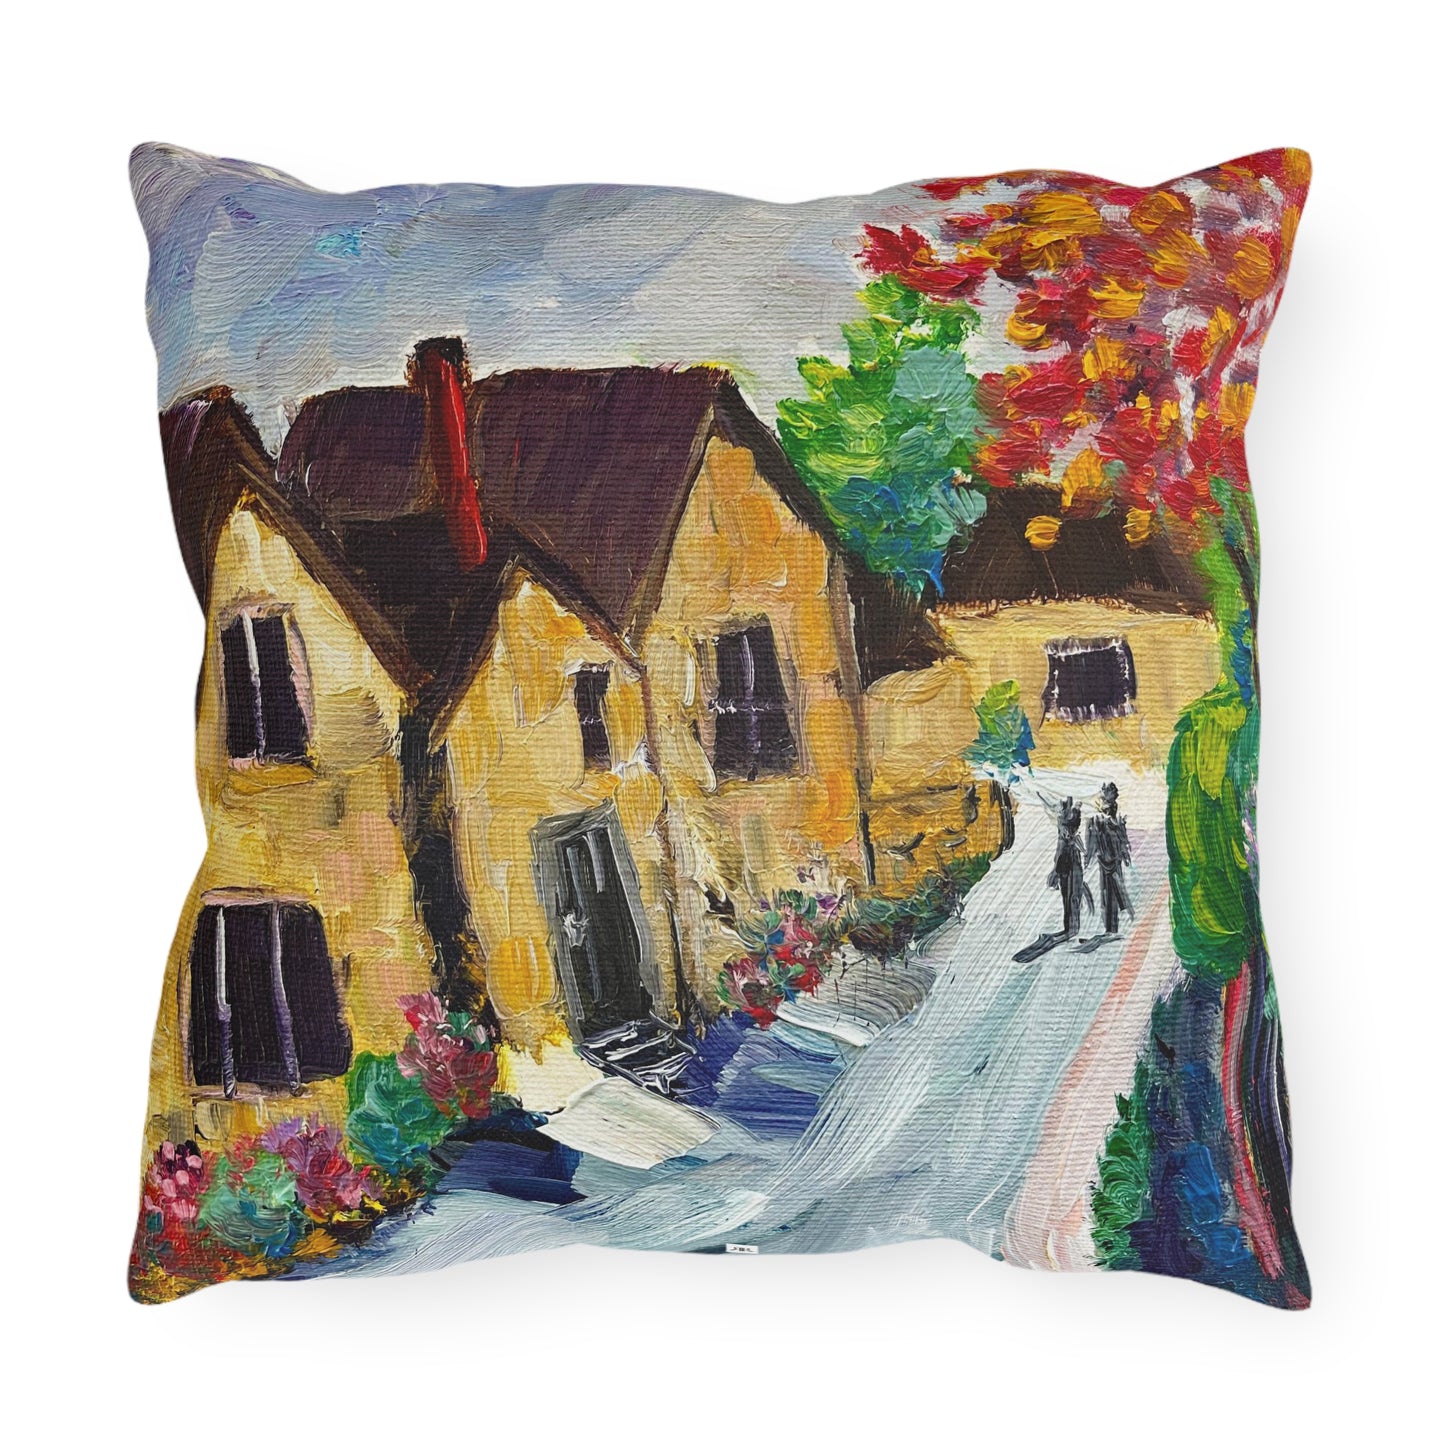 Medieval Village Cotswolds Outdoor Pillows